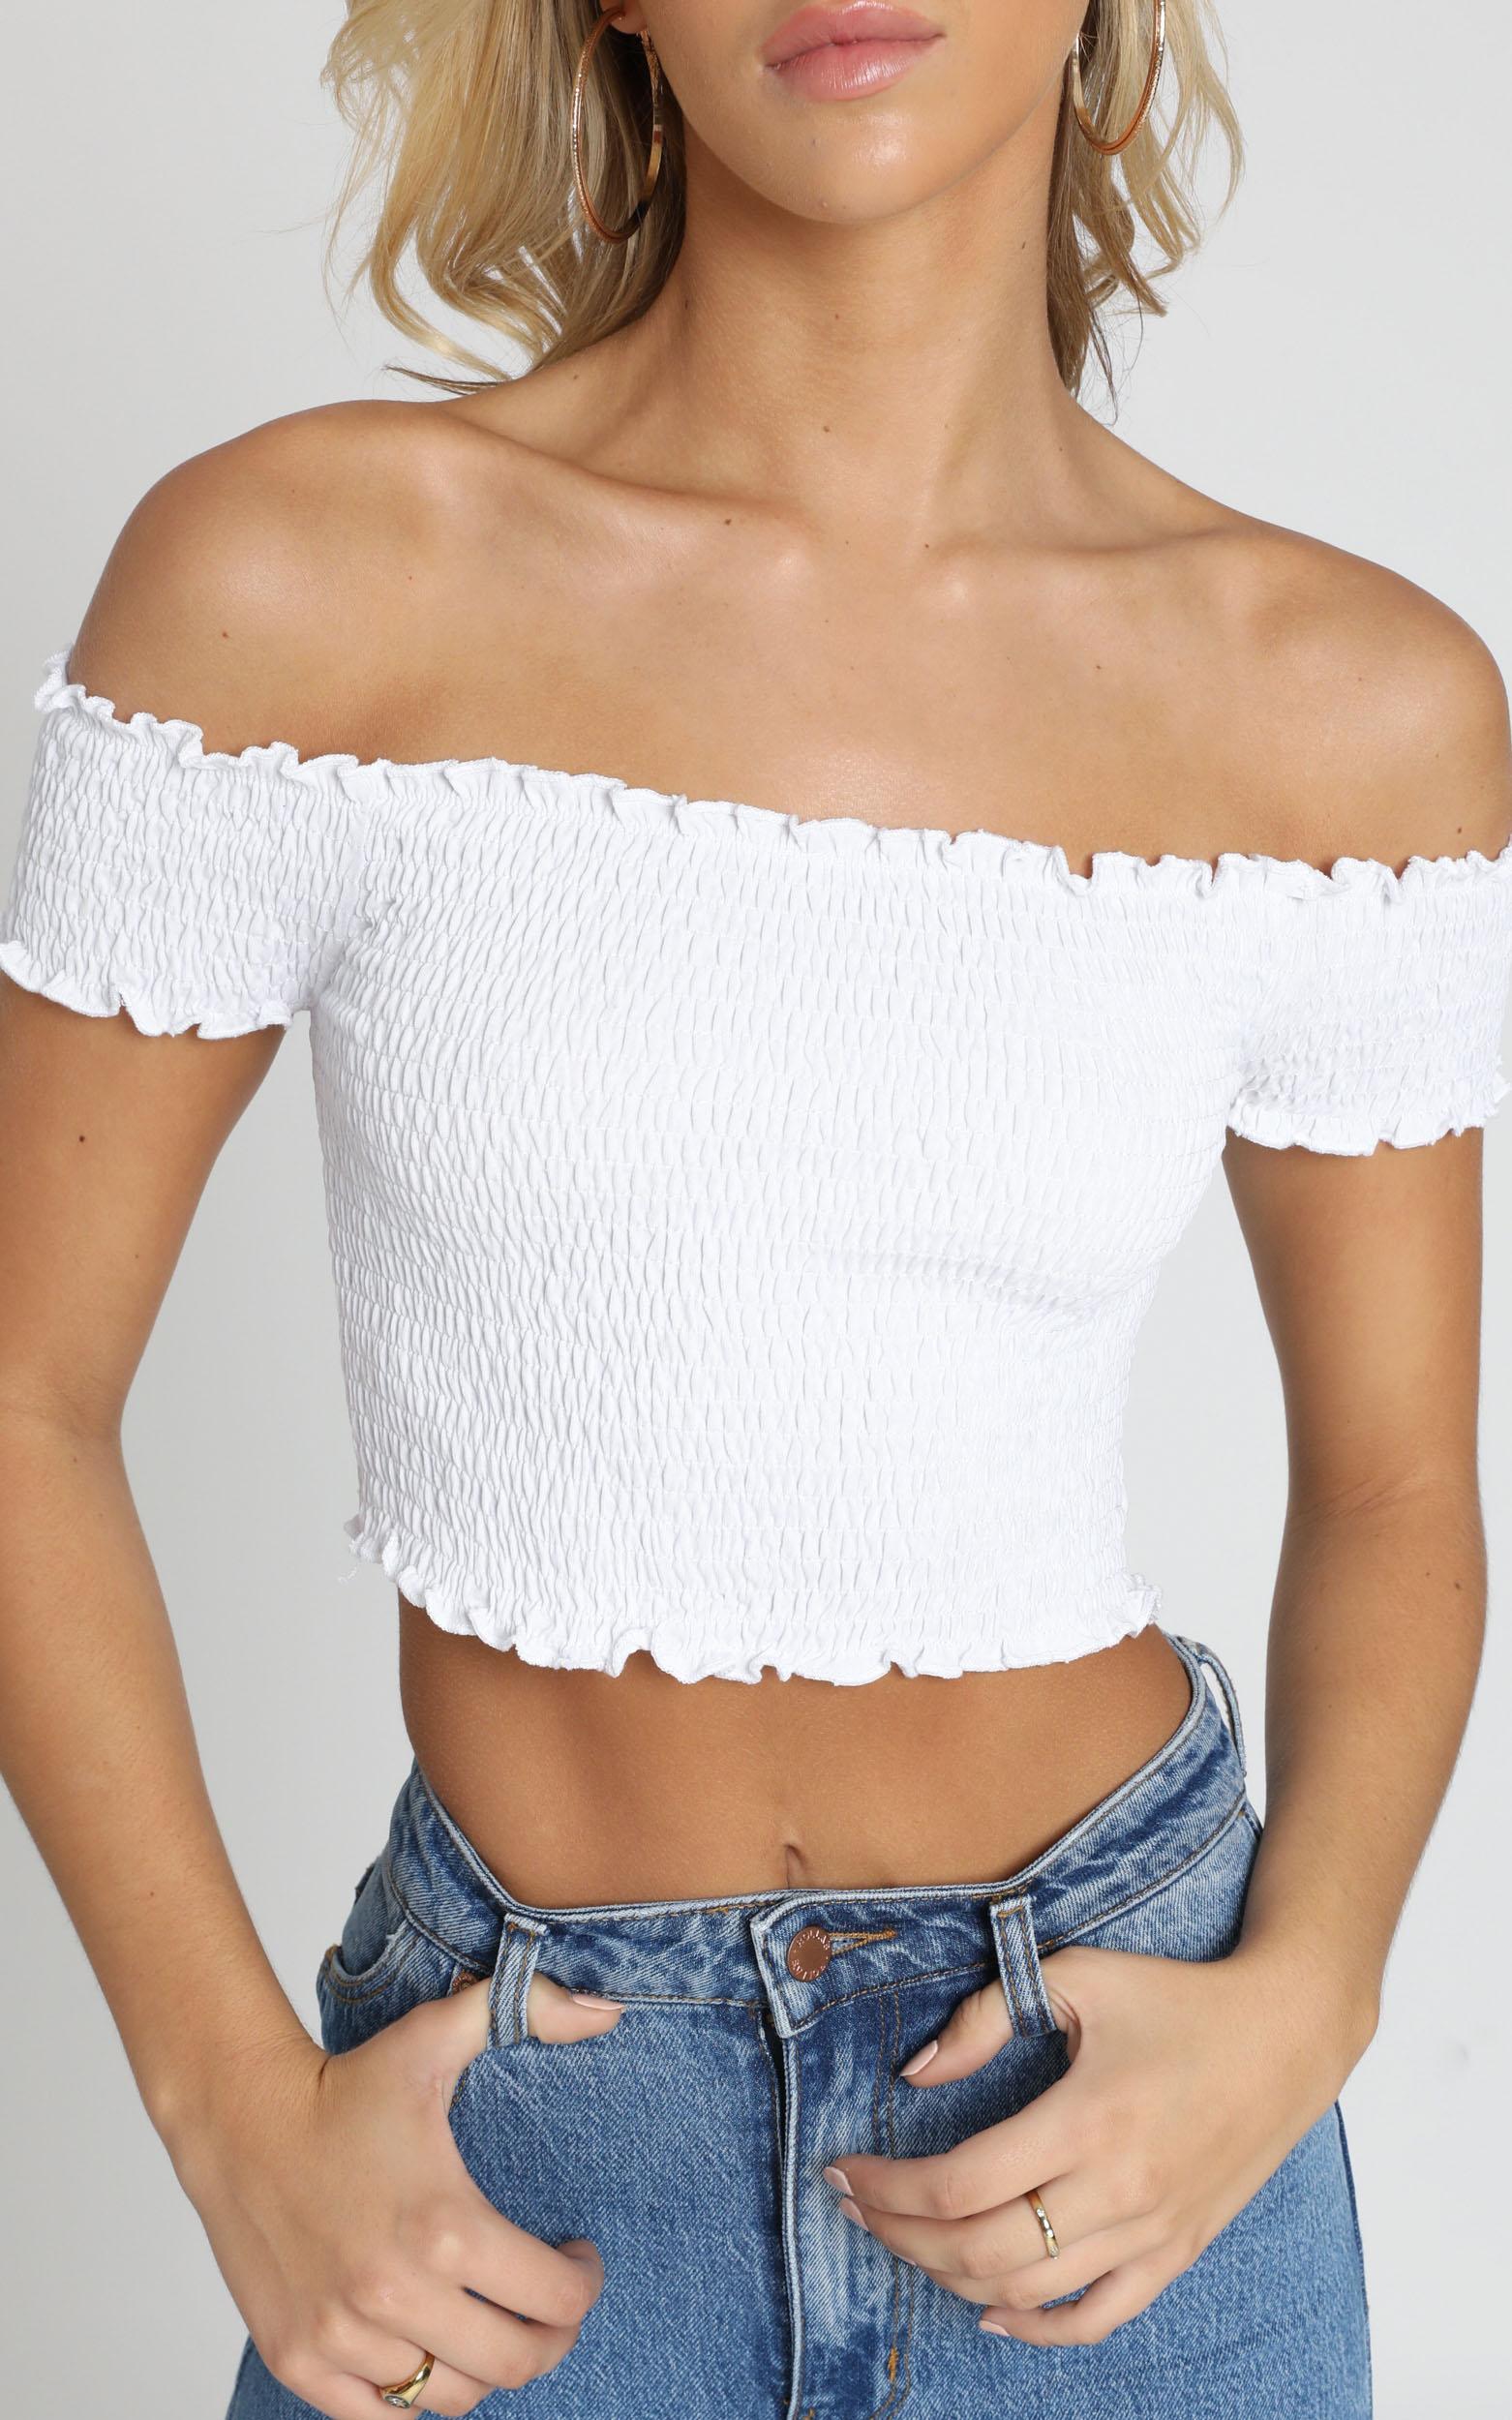 Dancing Fields Top in white - 6 (XS), White, hi-res image number null